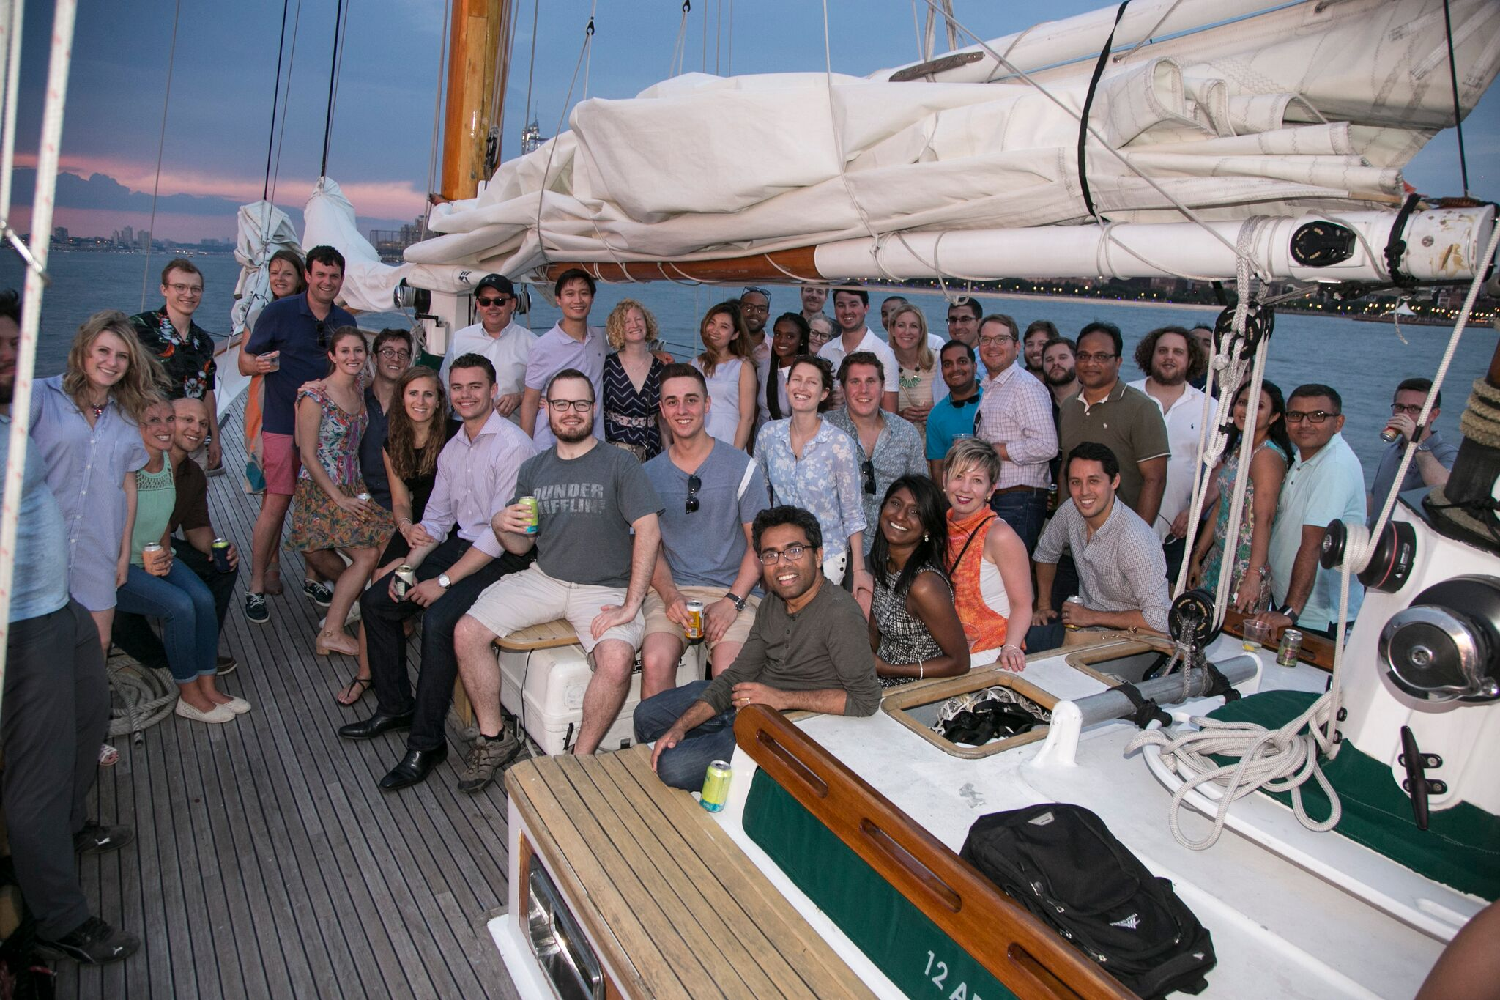 HERE WE ARE DURING OUR ANNUAL SUMMER PARTY! DON'T WORRY EVERYONE MADE IT BACK TO SHORE SAFE AND SOUND.